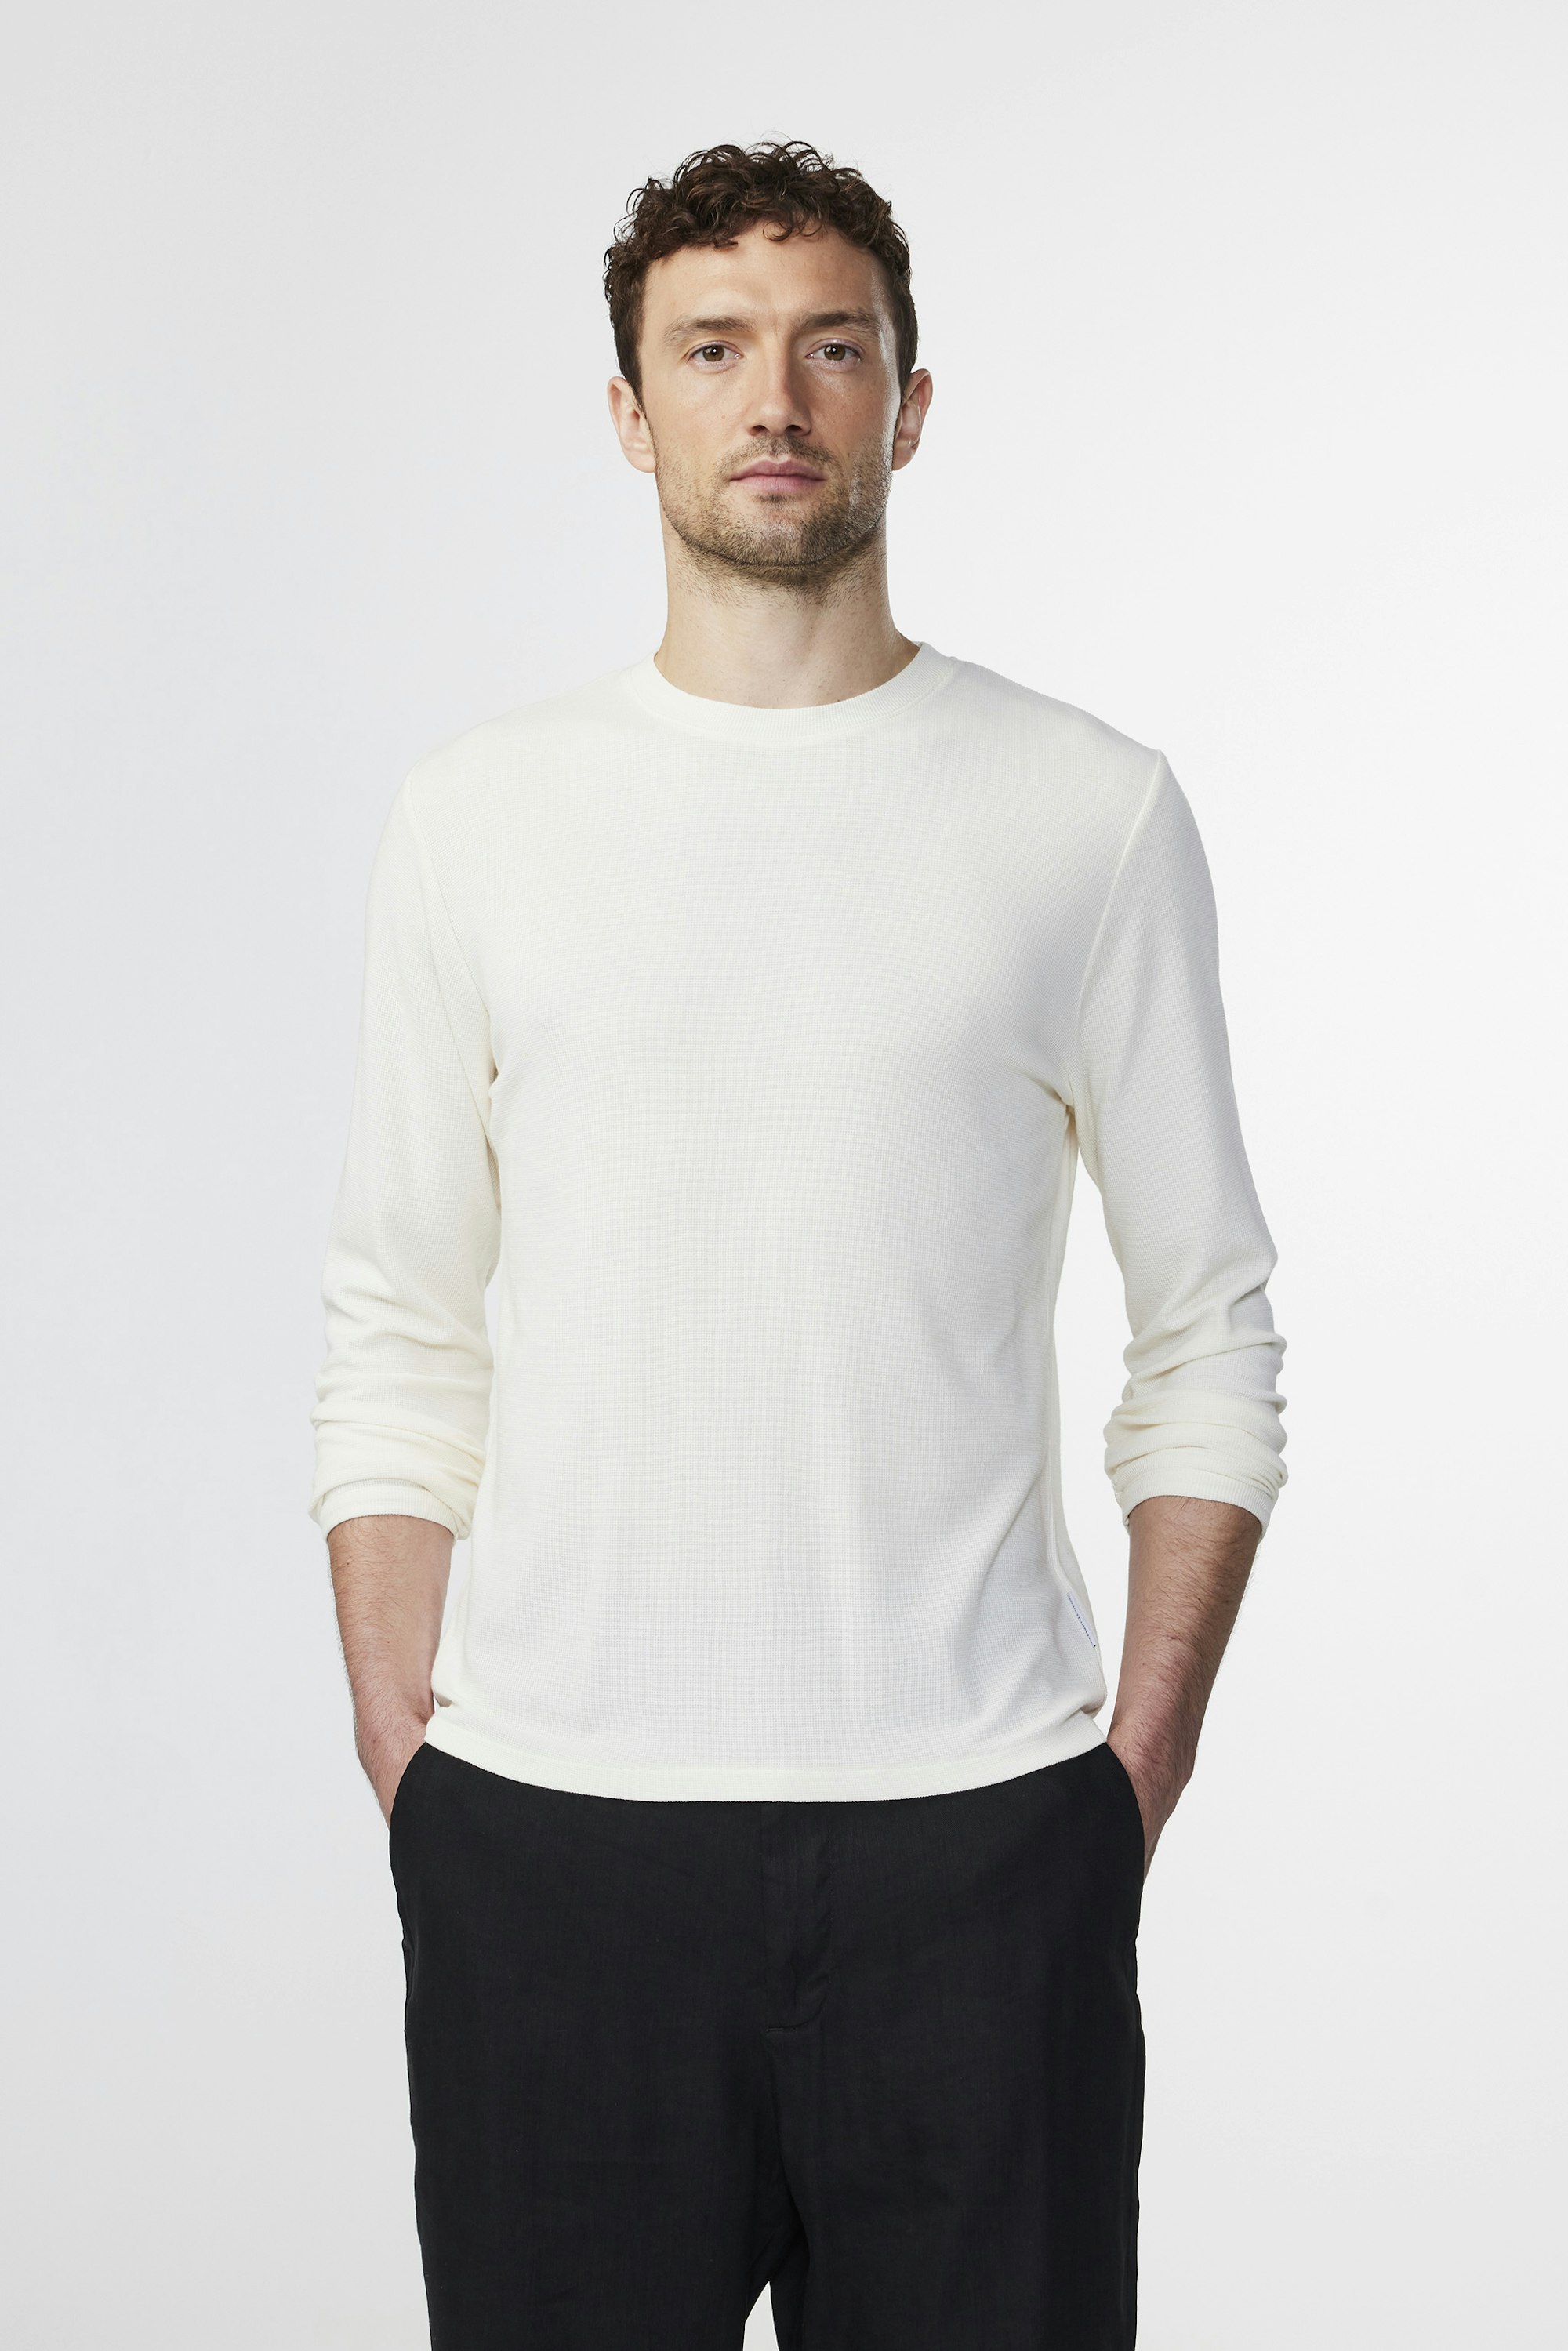 Clive 3323 men\'s t-shirt - White - Buy online at